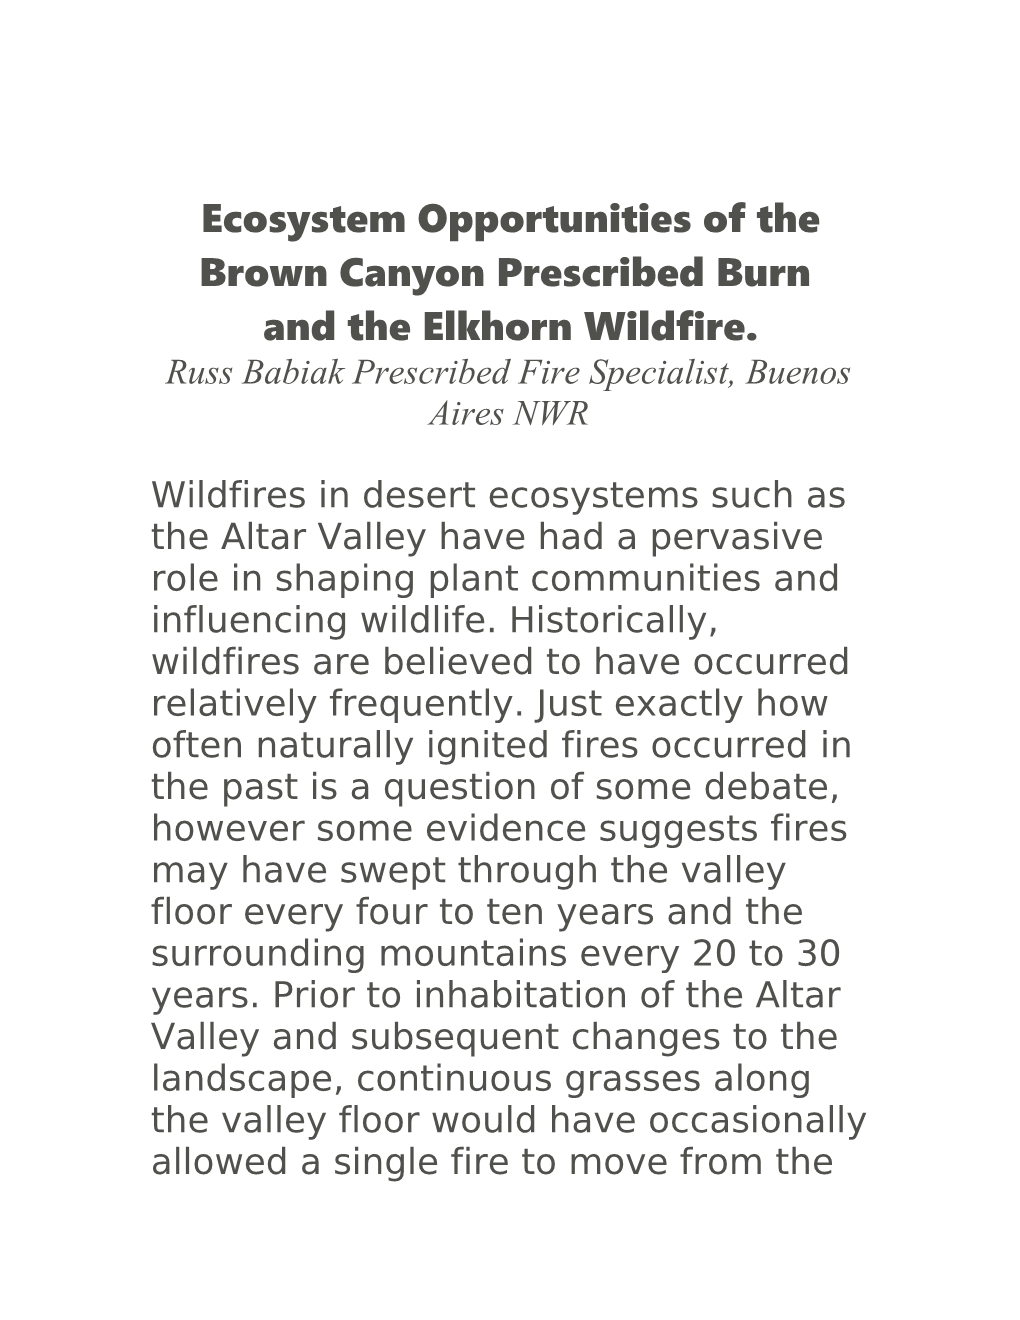 Ecosystem Opportunities of the Brown Canyon Prescribed Burn